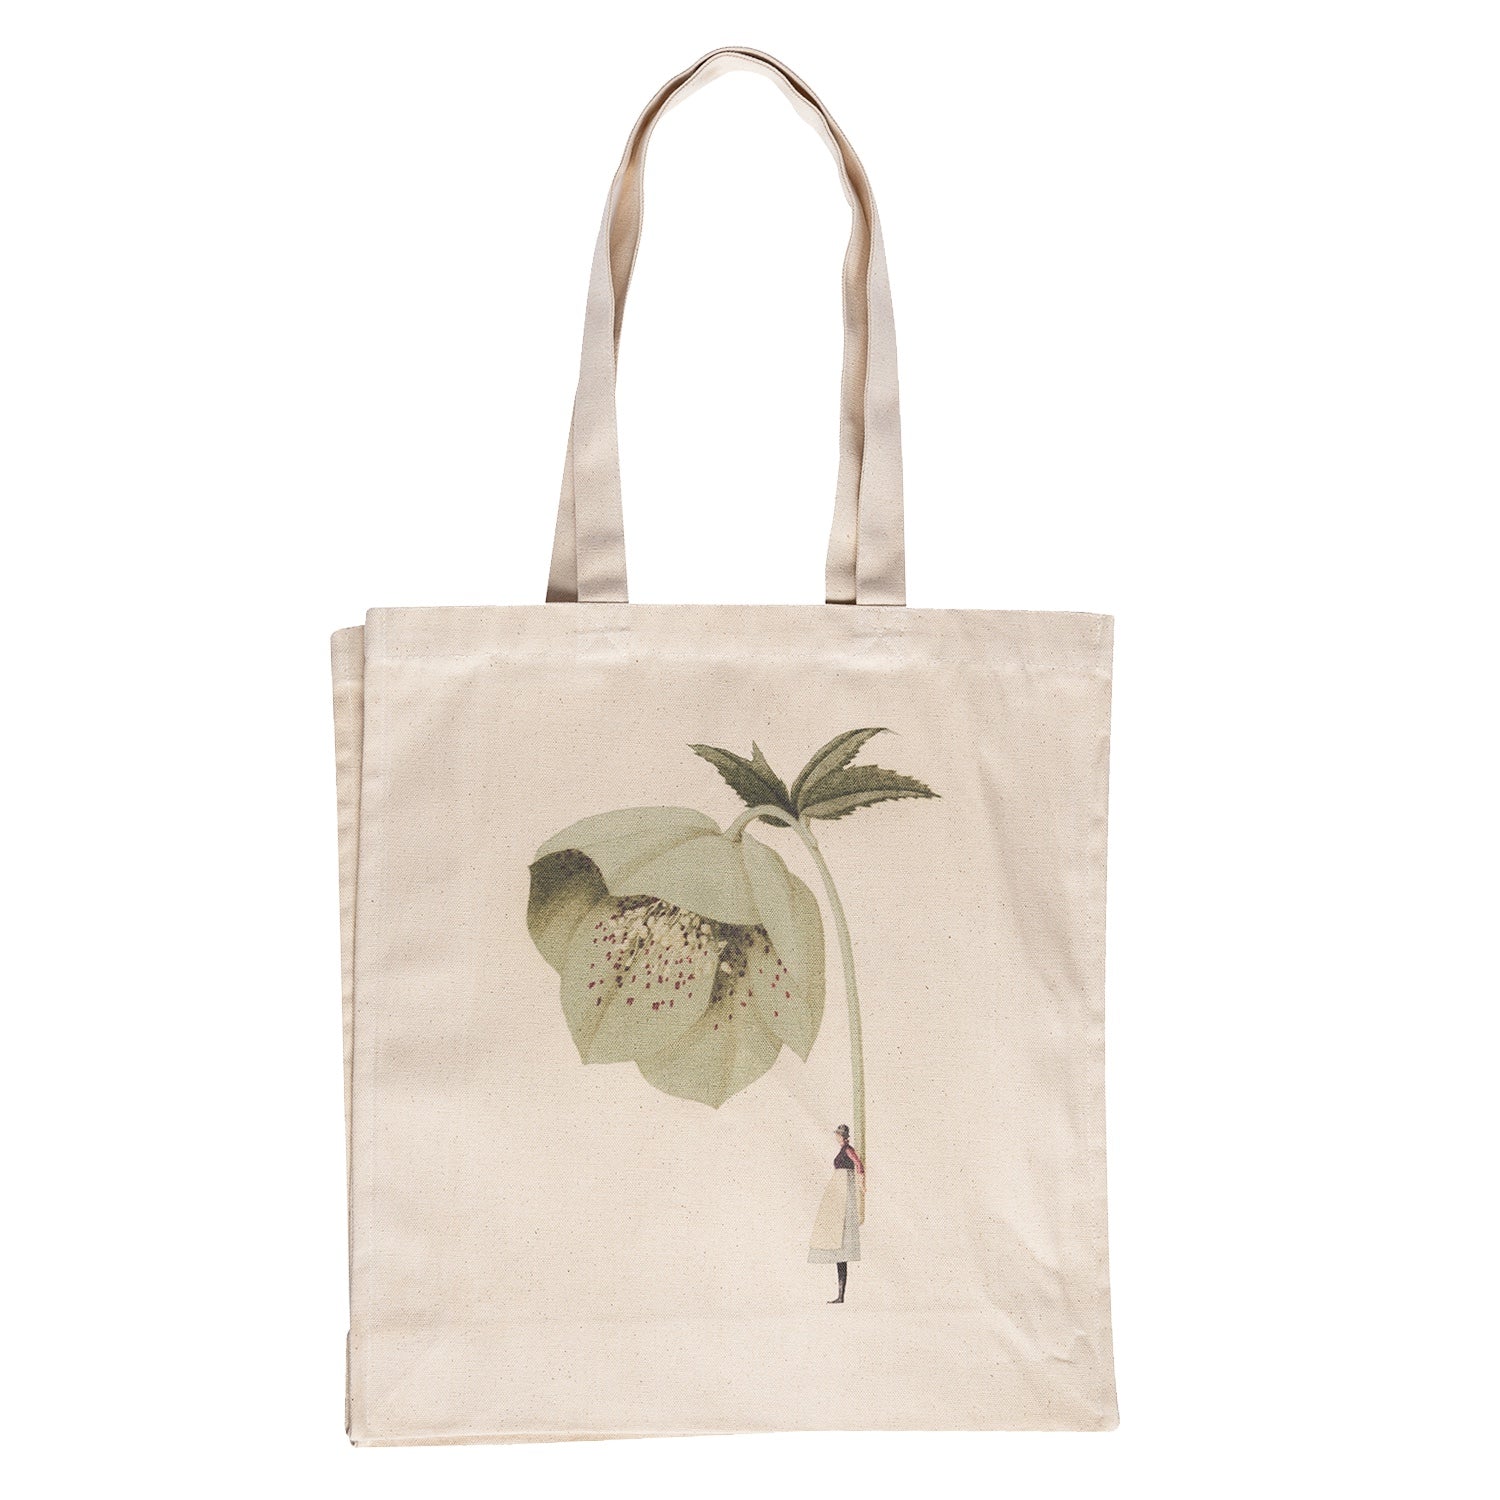 The Hellebore Heavyweight Canvas Tote Bag is light tan featuring a stylized illustration of a woman holding a gigantic light green hellebore bloom by the stem.